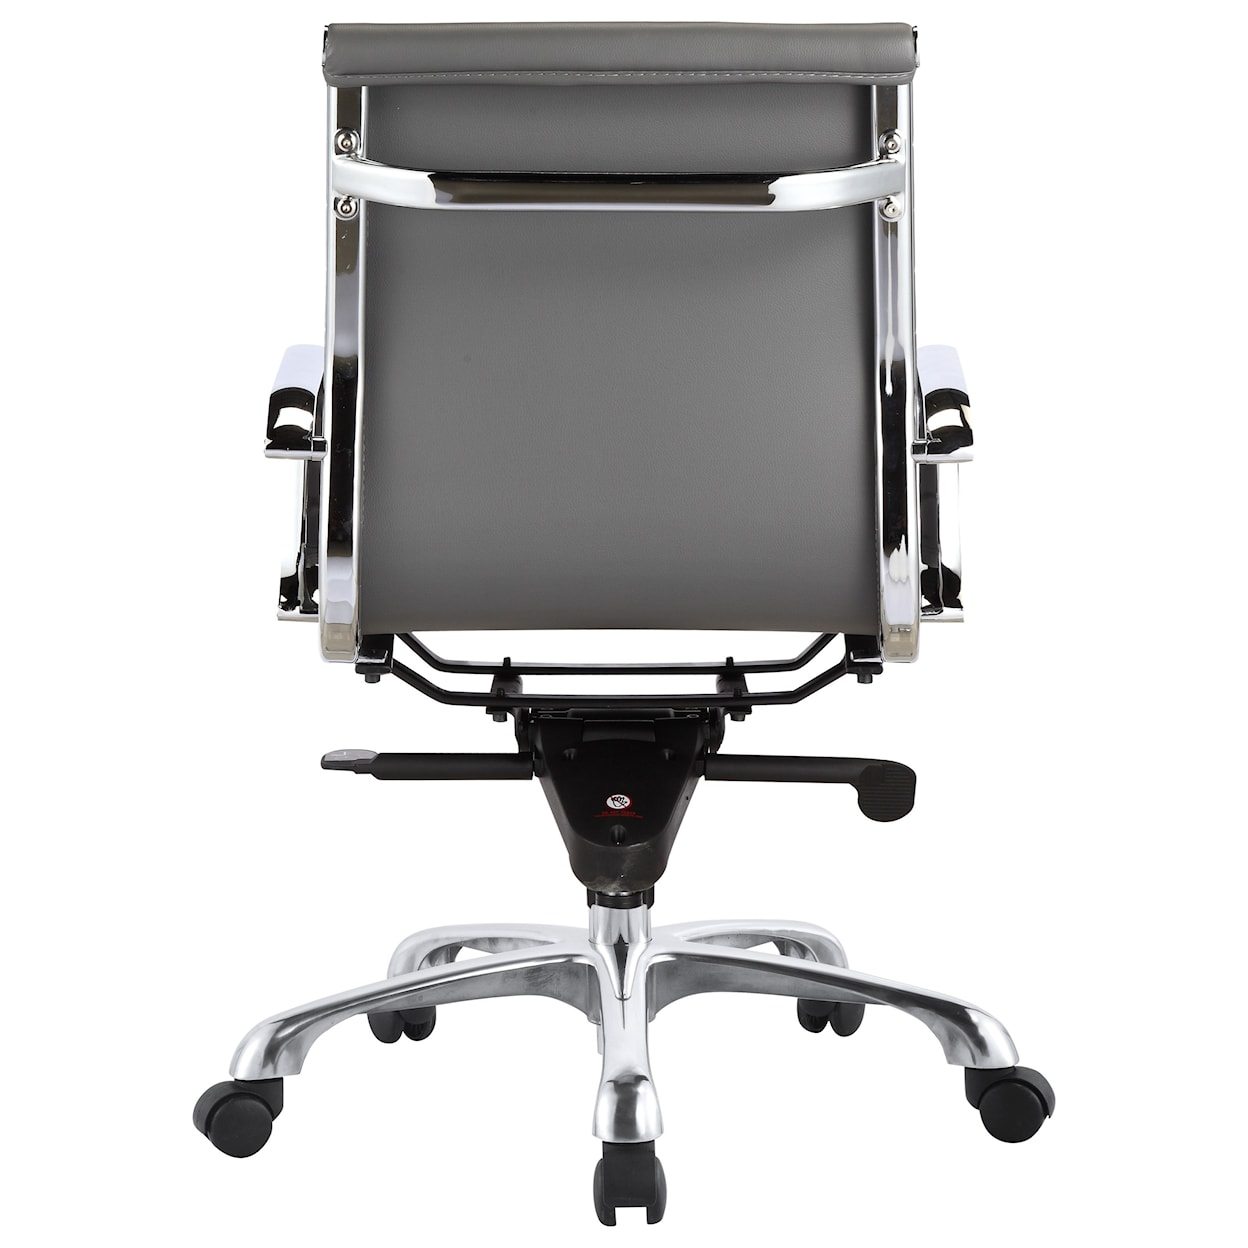 Moe's Home Collection Omega Office Chair Low Back